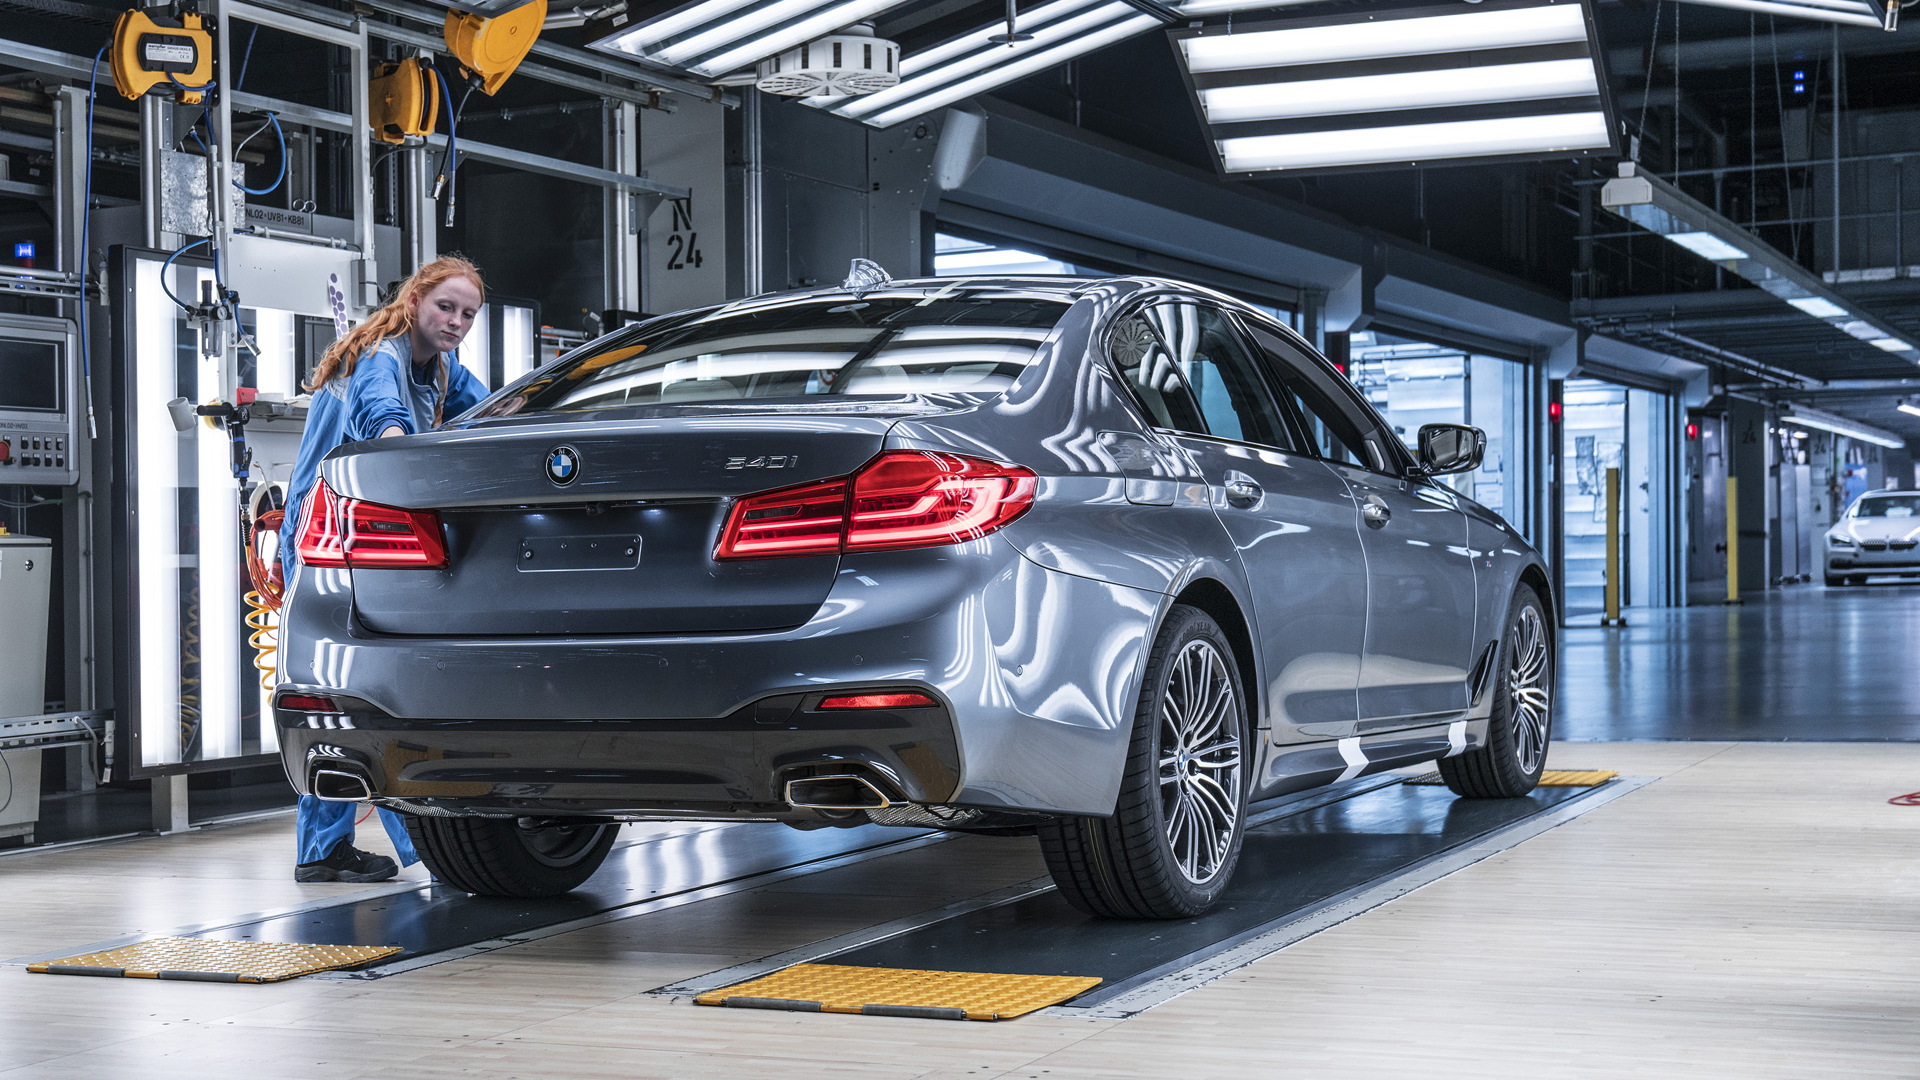 2017 BMW 5-Series production in Dingolfing, Germany